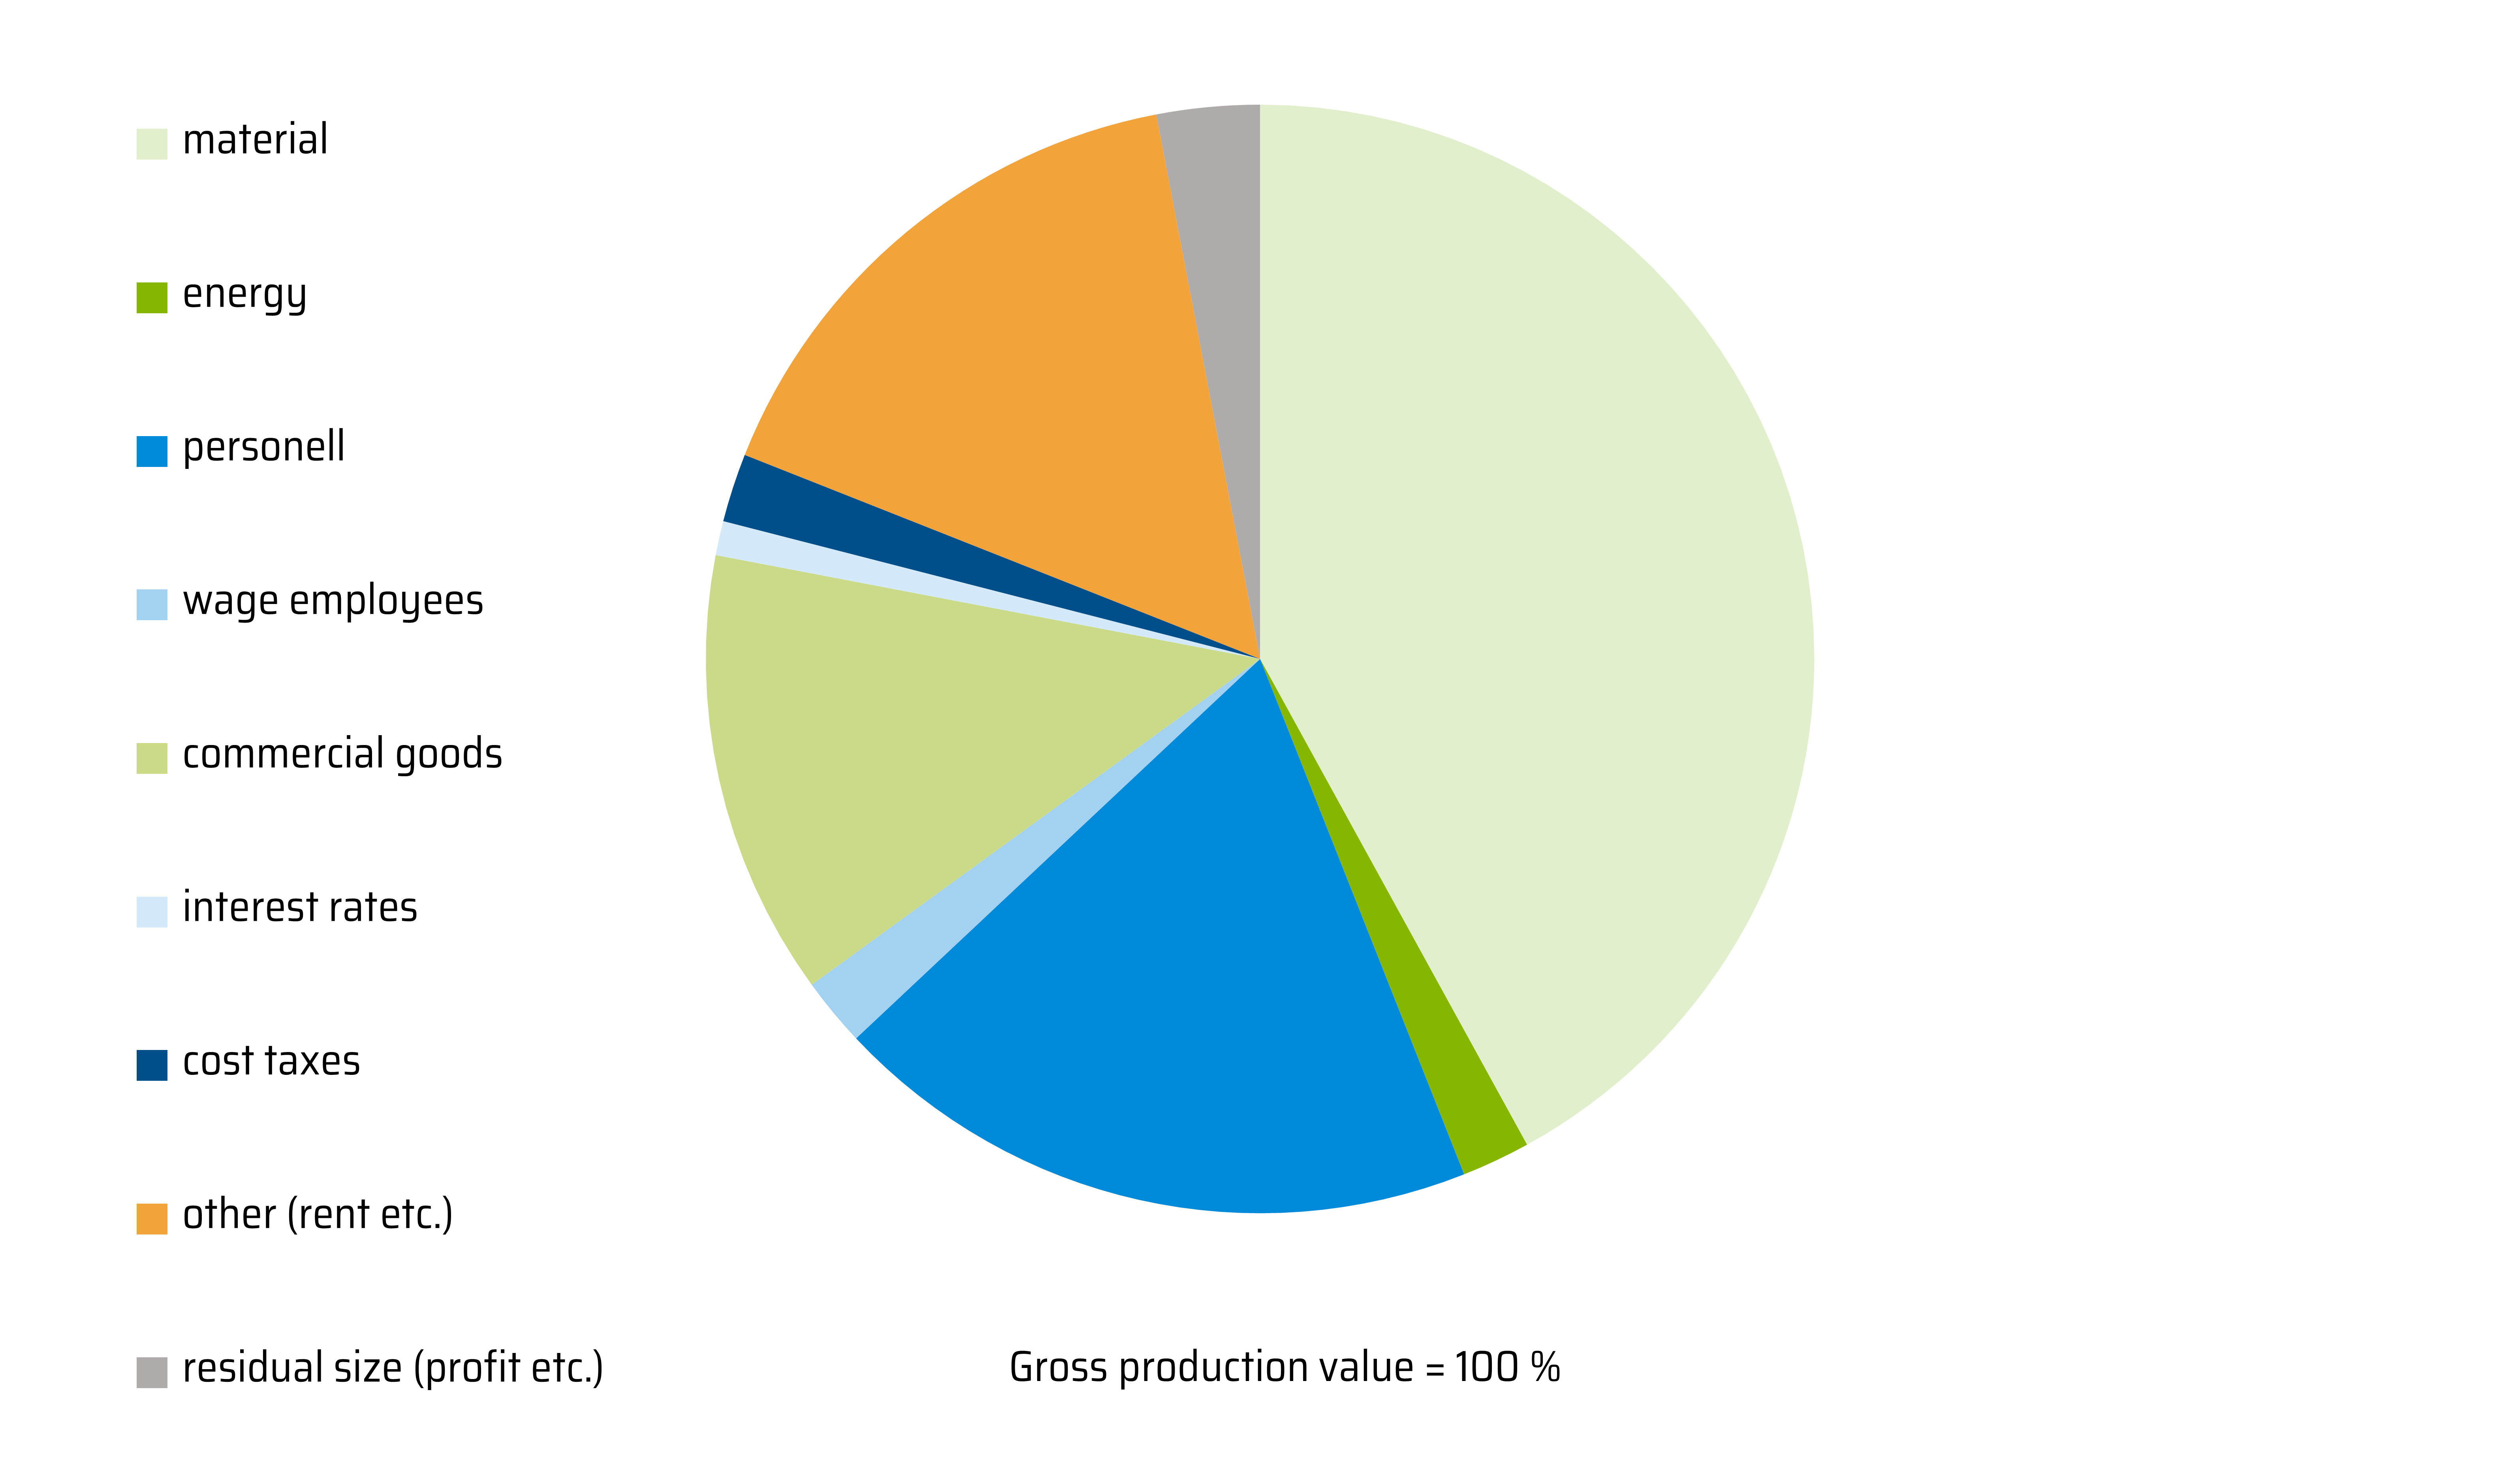 The figure shows a pie chart of the gross production value of small and medium-sized enterprises in Germany for 2018. It can be seen that at 42%, more than 1/3 of the gross production value is attributable to materials.